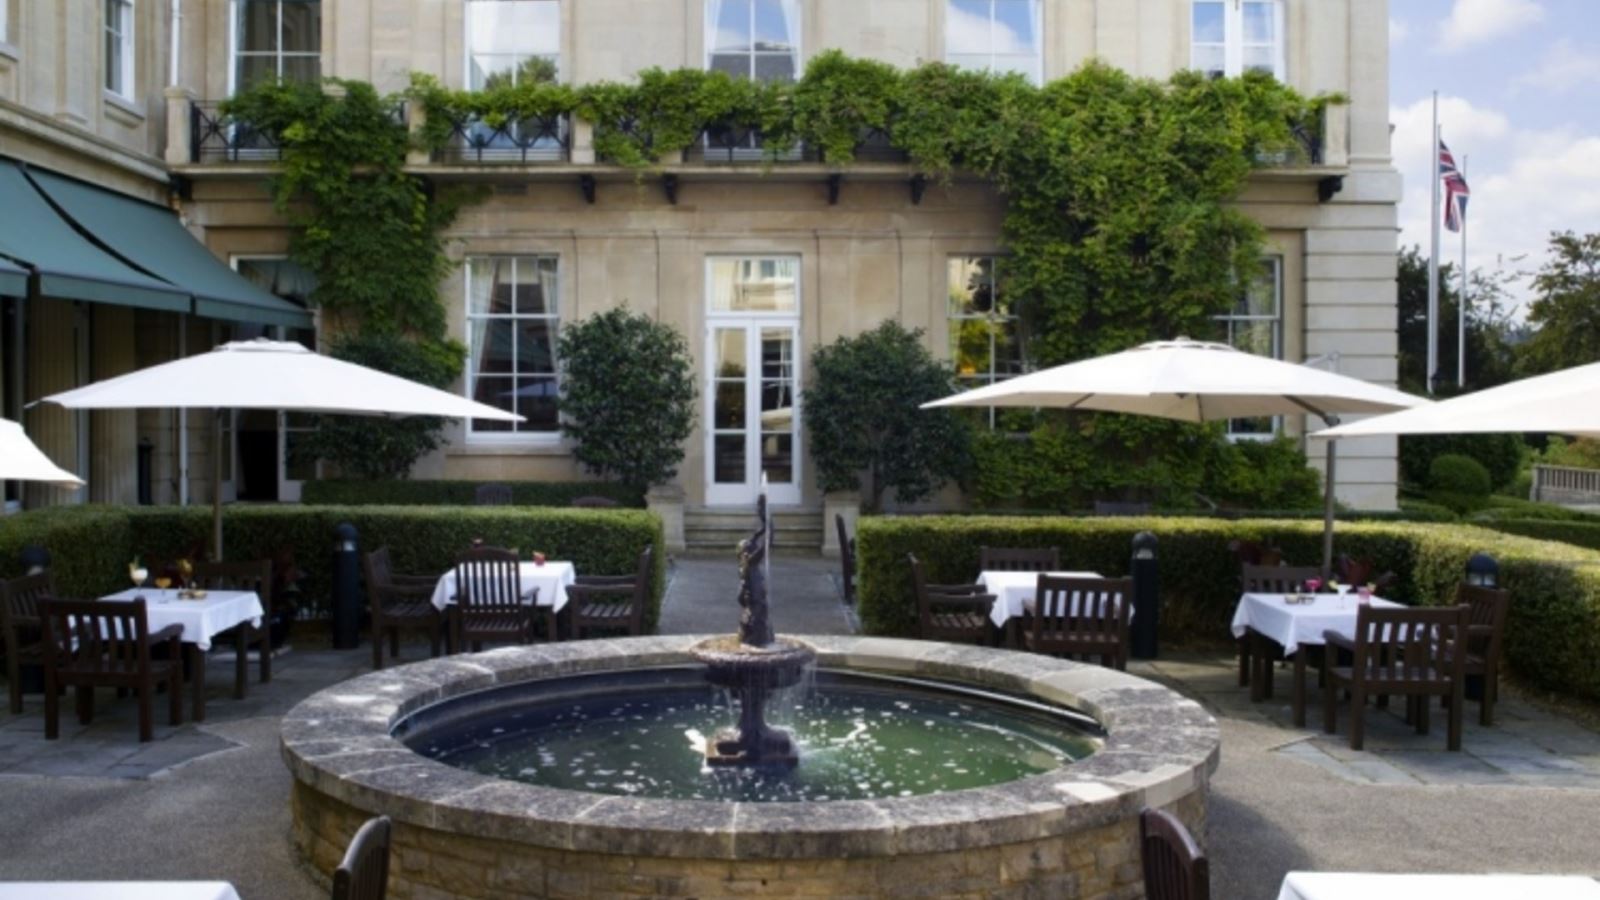 Fountain and outdoor tables at MacDonald Bath Spa Hotel